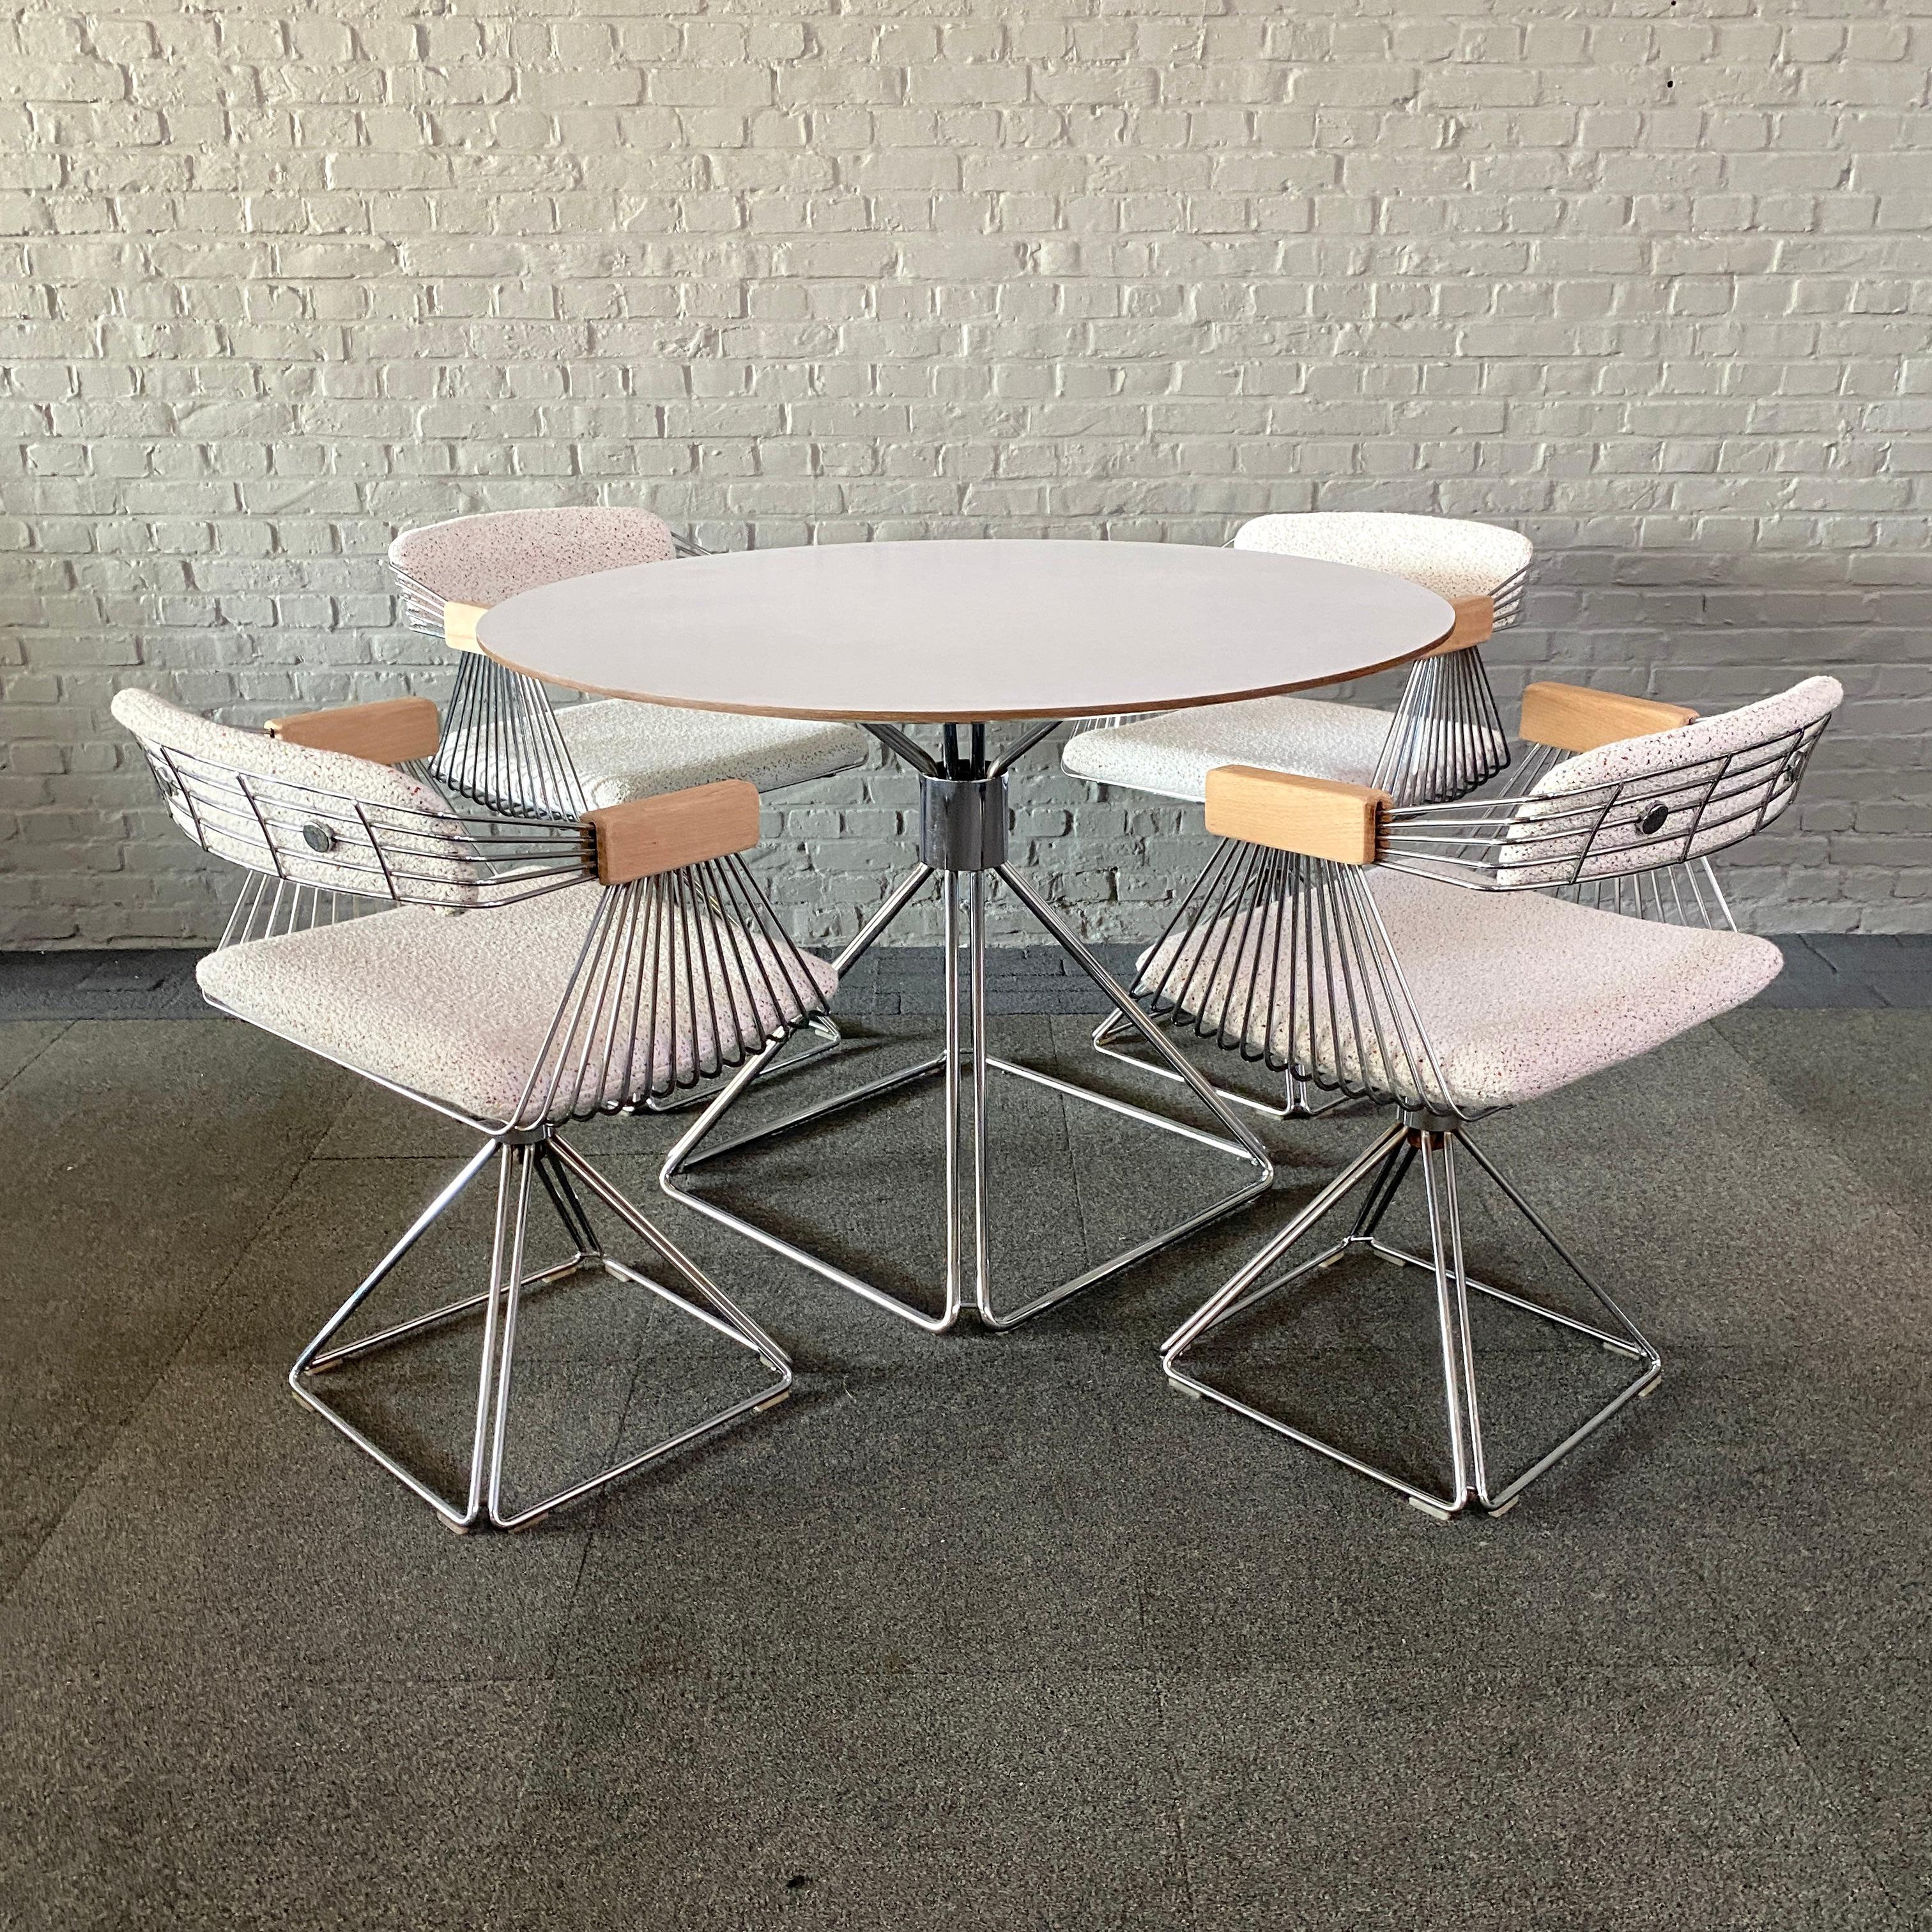 Amazing & elegant Dinning Room Set.
Designed by de Belgium industrial designer Rudi Verelst for Novalux.
The set consists of round dining table and 4 swivel armchairs.

These Eye-catching 